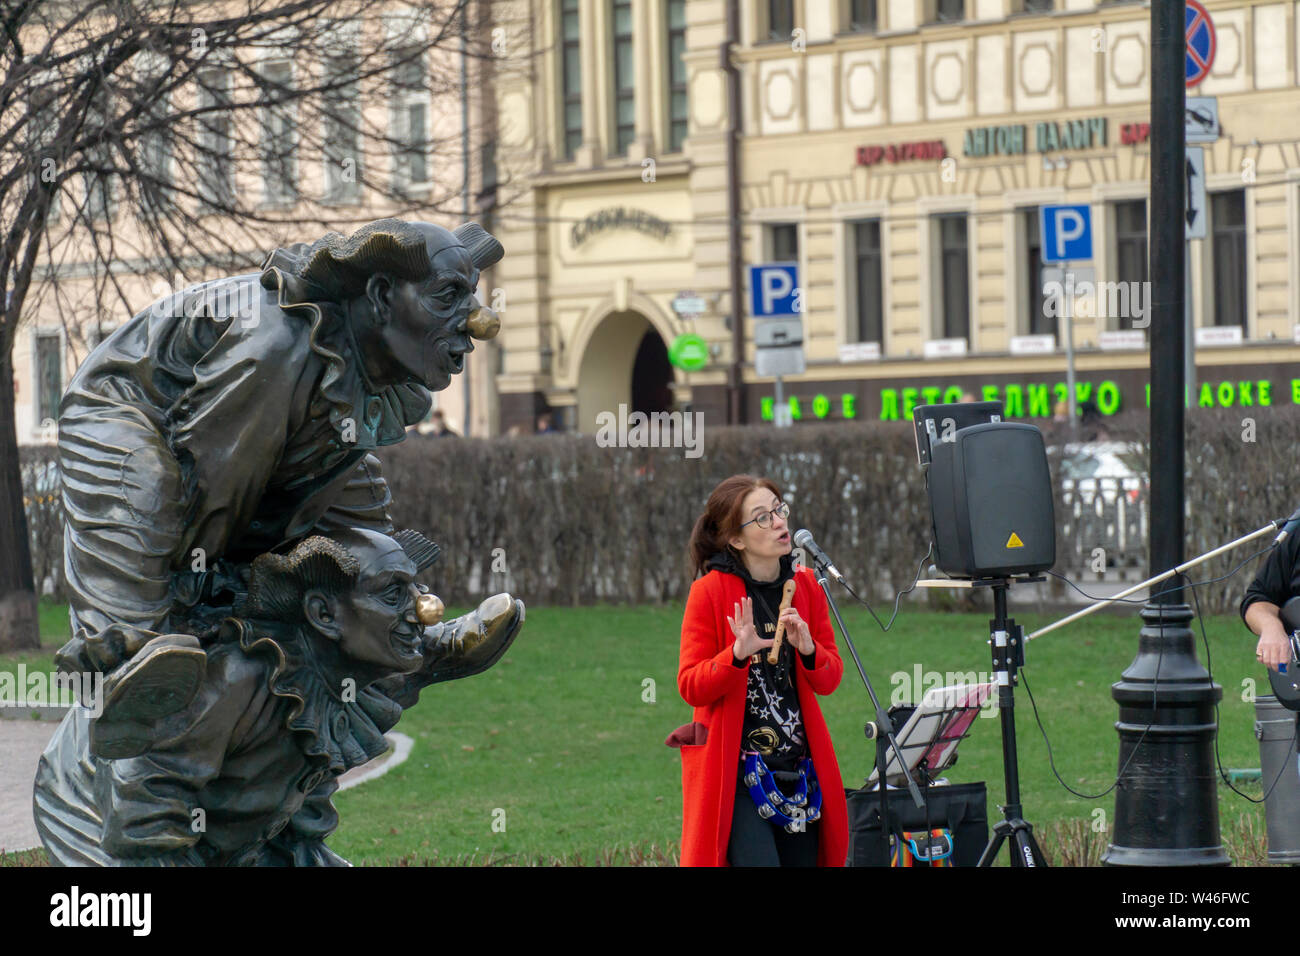 Moscow, Russia - April 29, 2019: Musical street perforners and a bronze statue of clown at Clowns Square on Tsvetnoy Boulevard in Moscow Stock Photo